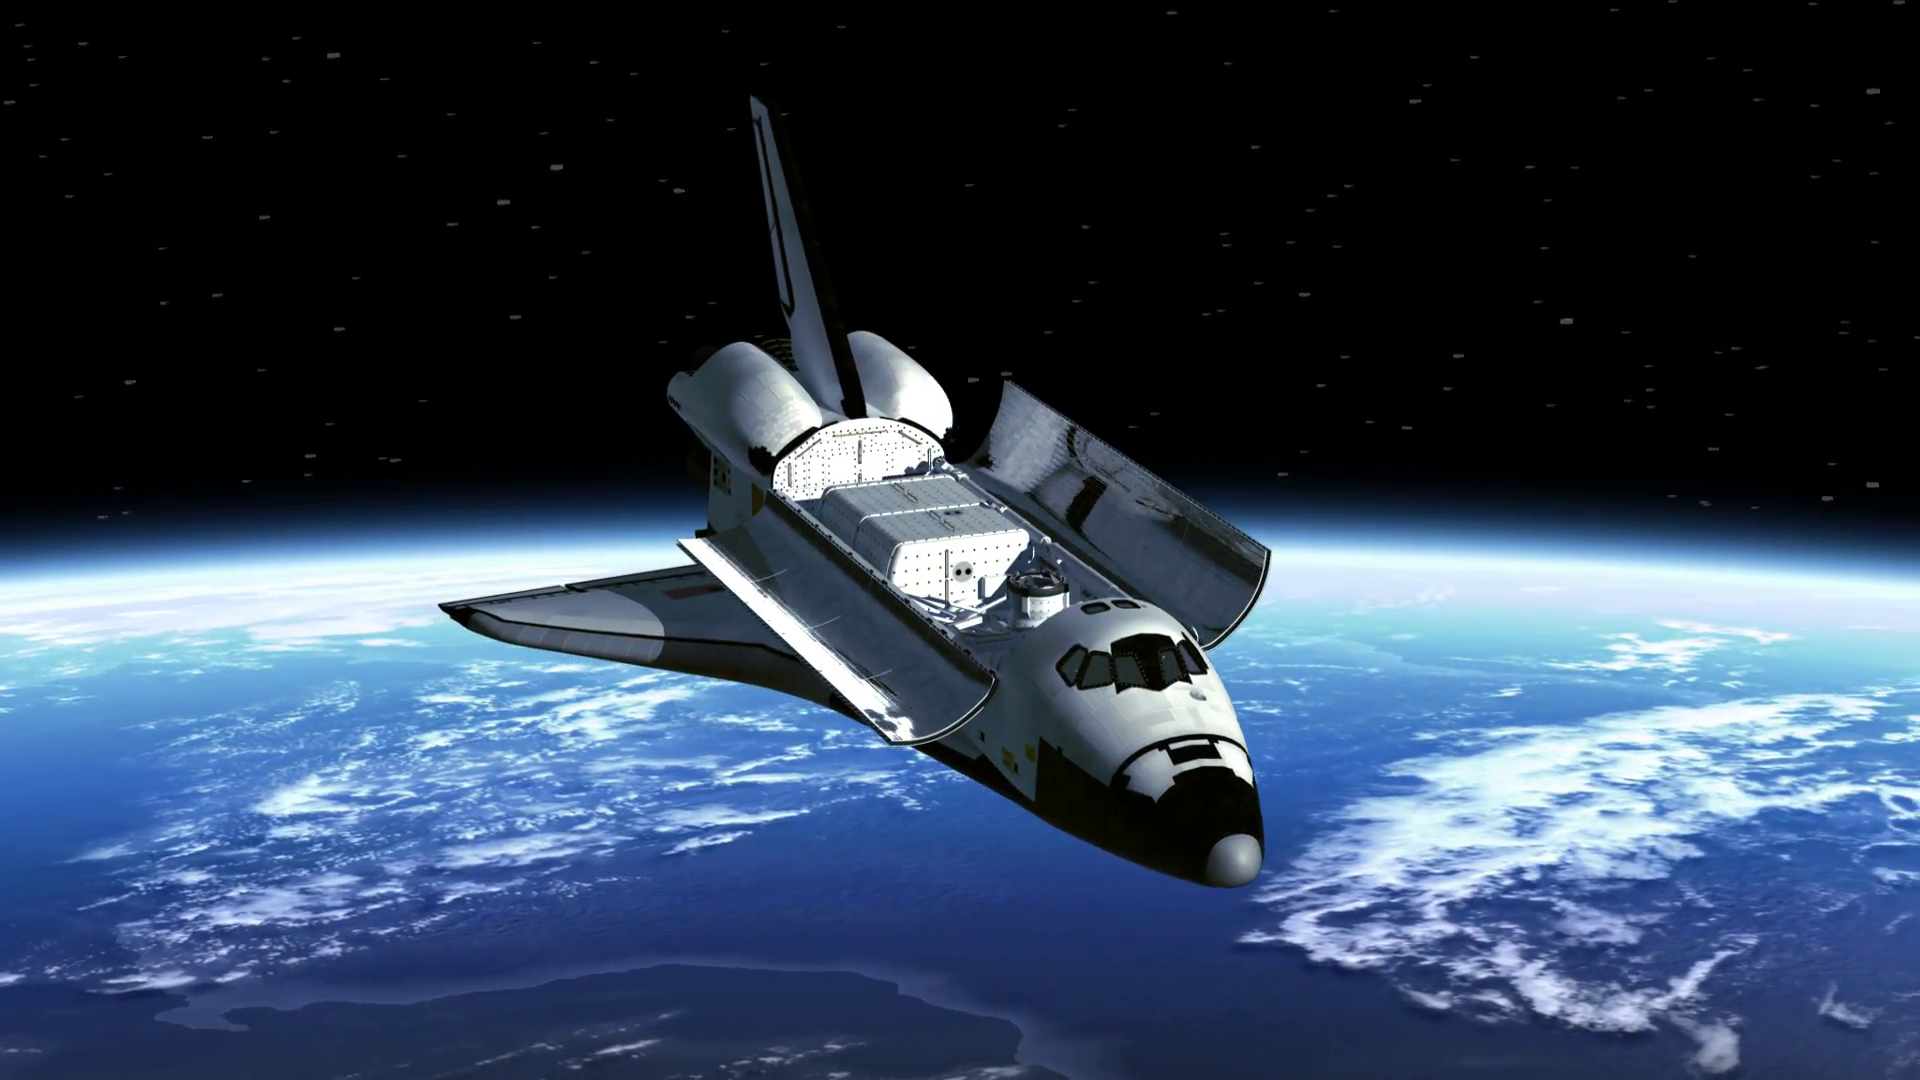 Space Shuttle Payload Bay Doors Opens Motion Background - Videoblocks